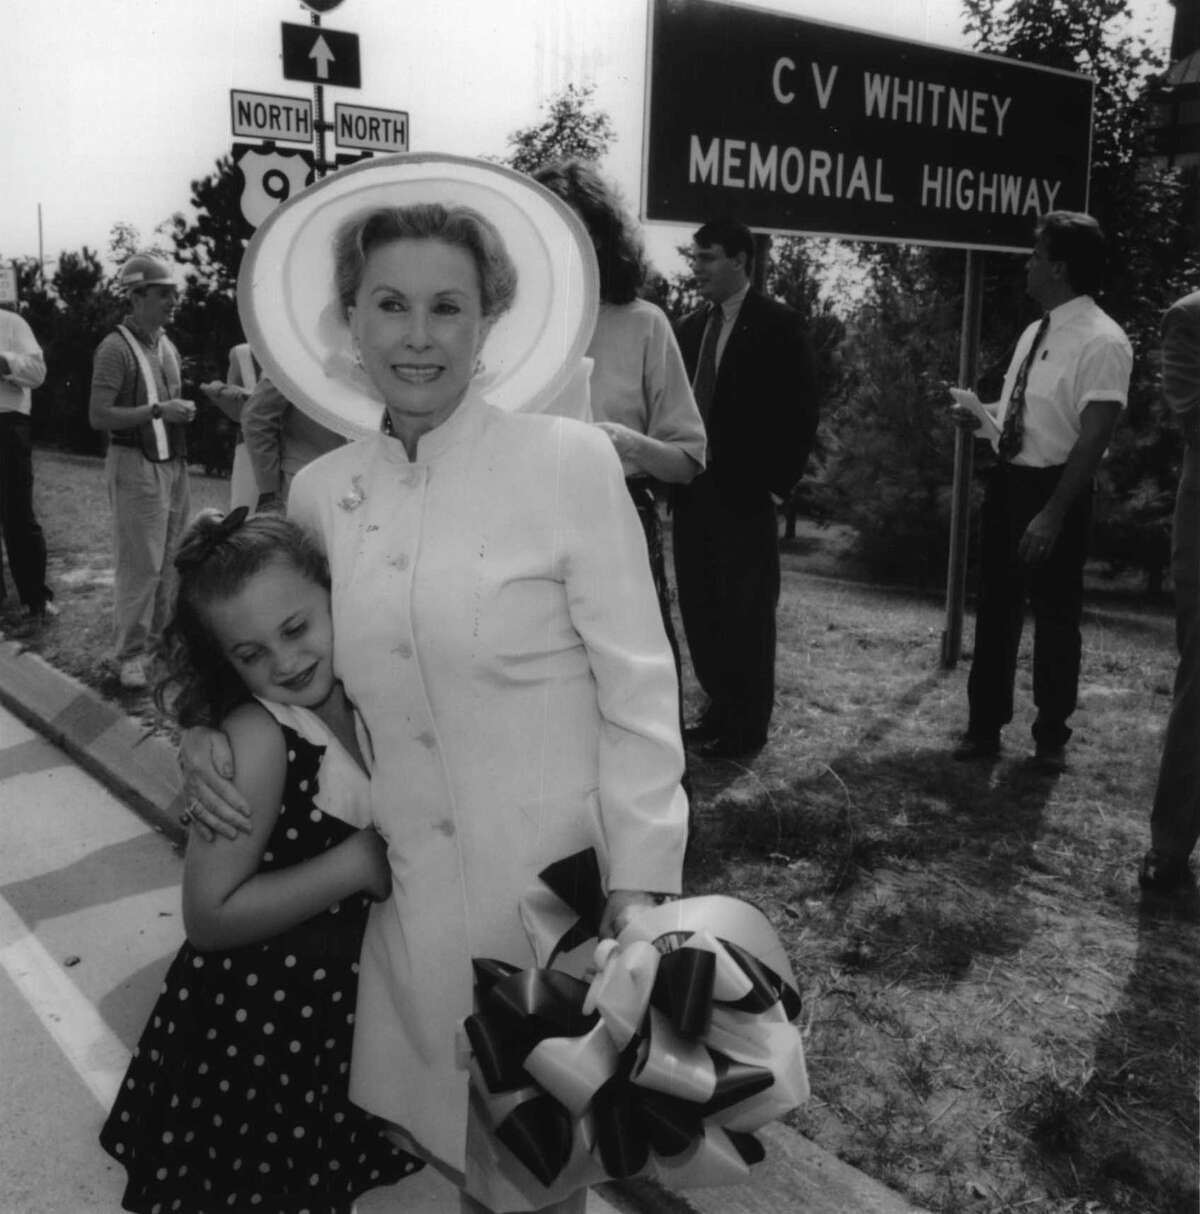 Route 50 at Broadway, Saratoga Springs, New York - Kristine Schlachter, 8, hugs her grandmother, Mary Lou Whitney, following a ceremony renaming the Route 50 arterial in Saratoga Springs the C.V. Whitney Memorial Highway in honor of Mary Lou's husband, Sonny Whitney. August 09, 1994 (Paul D. Kniskern/Times Union Archive)